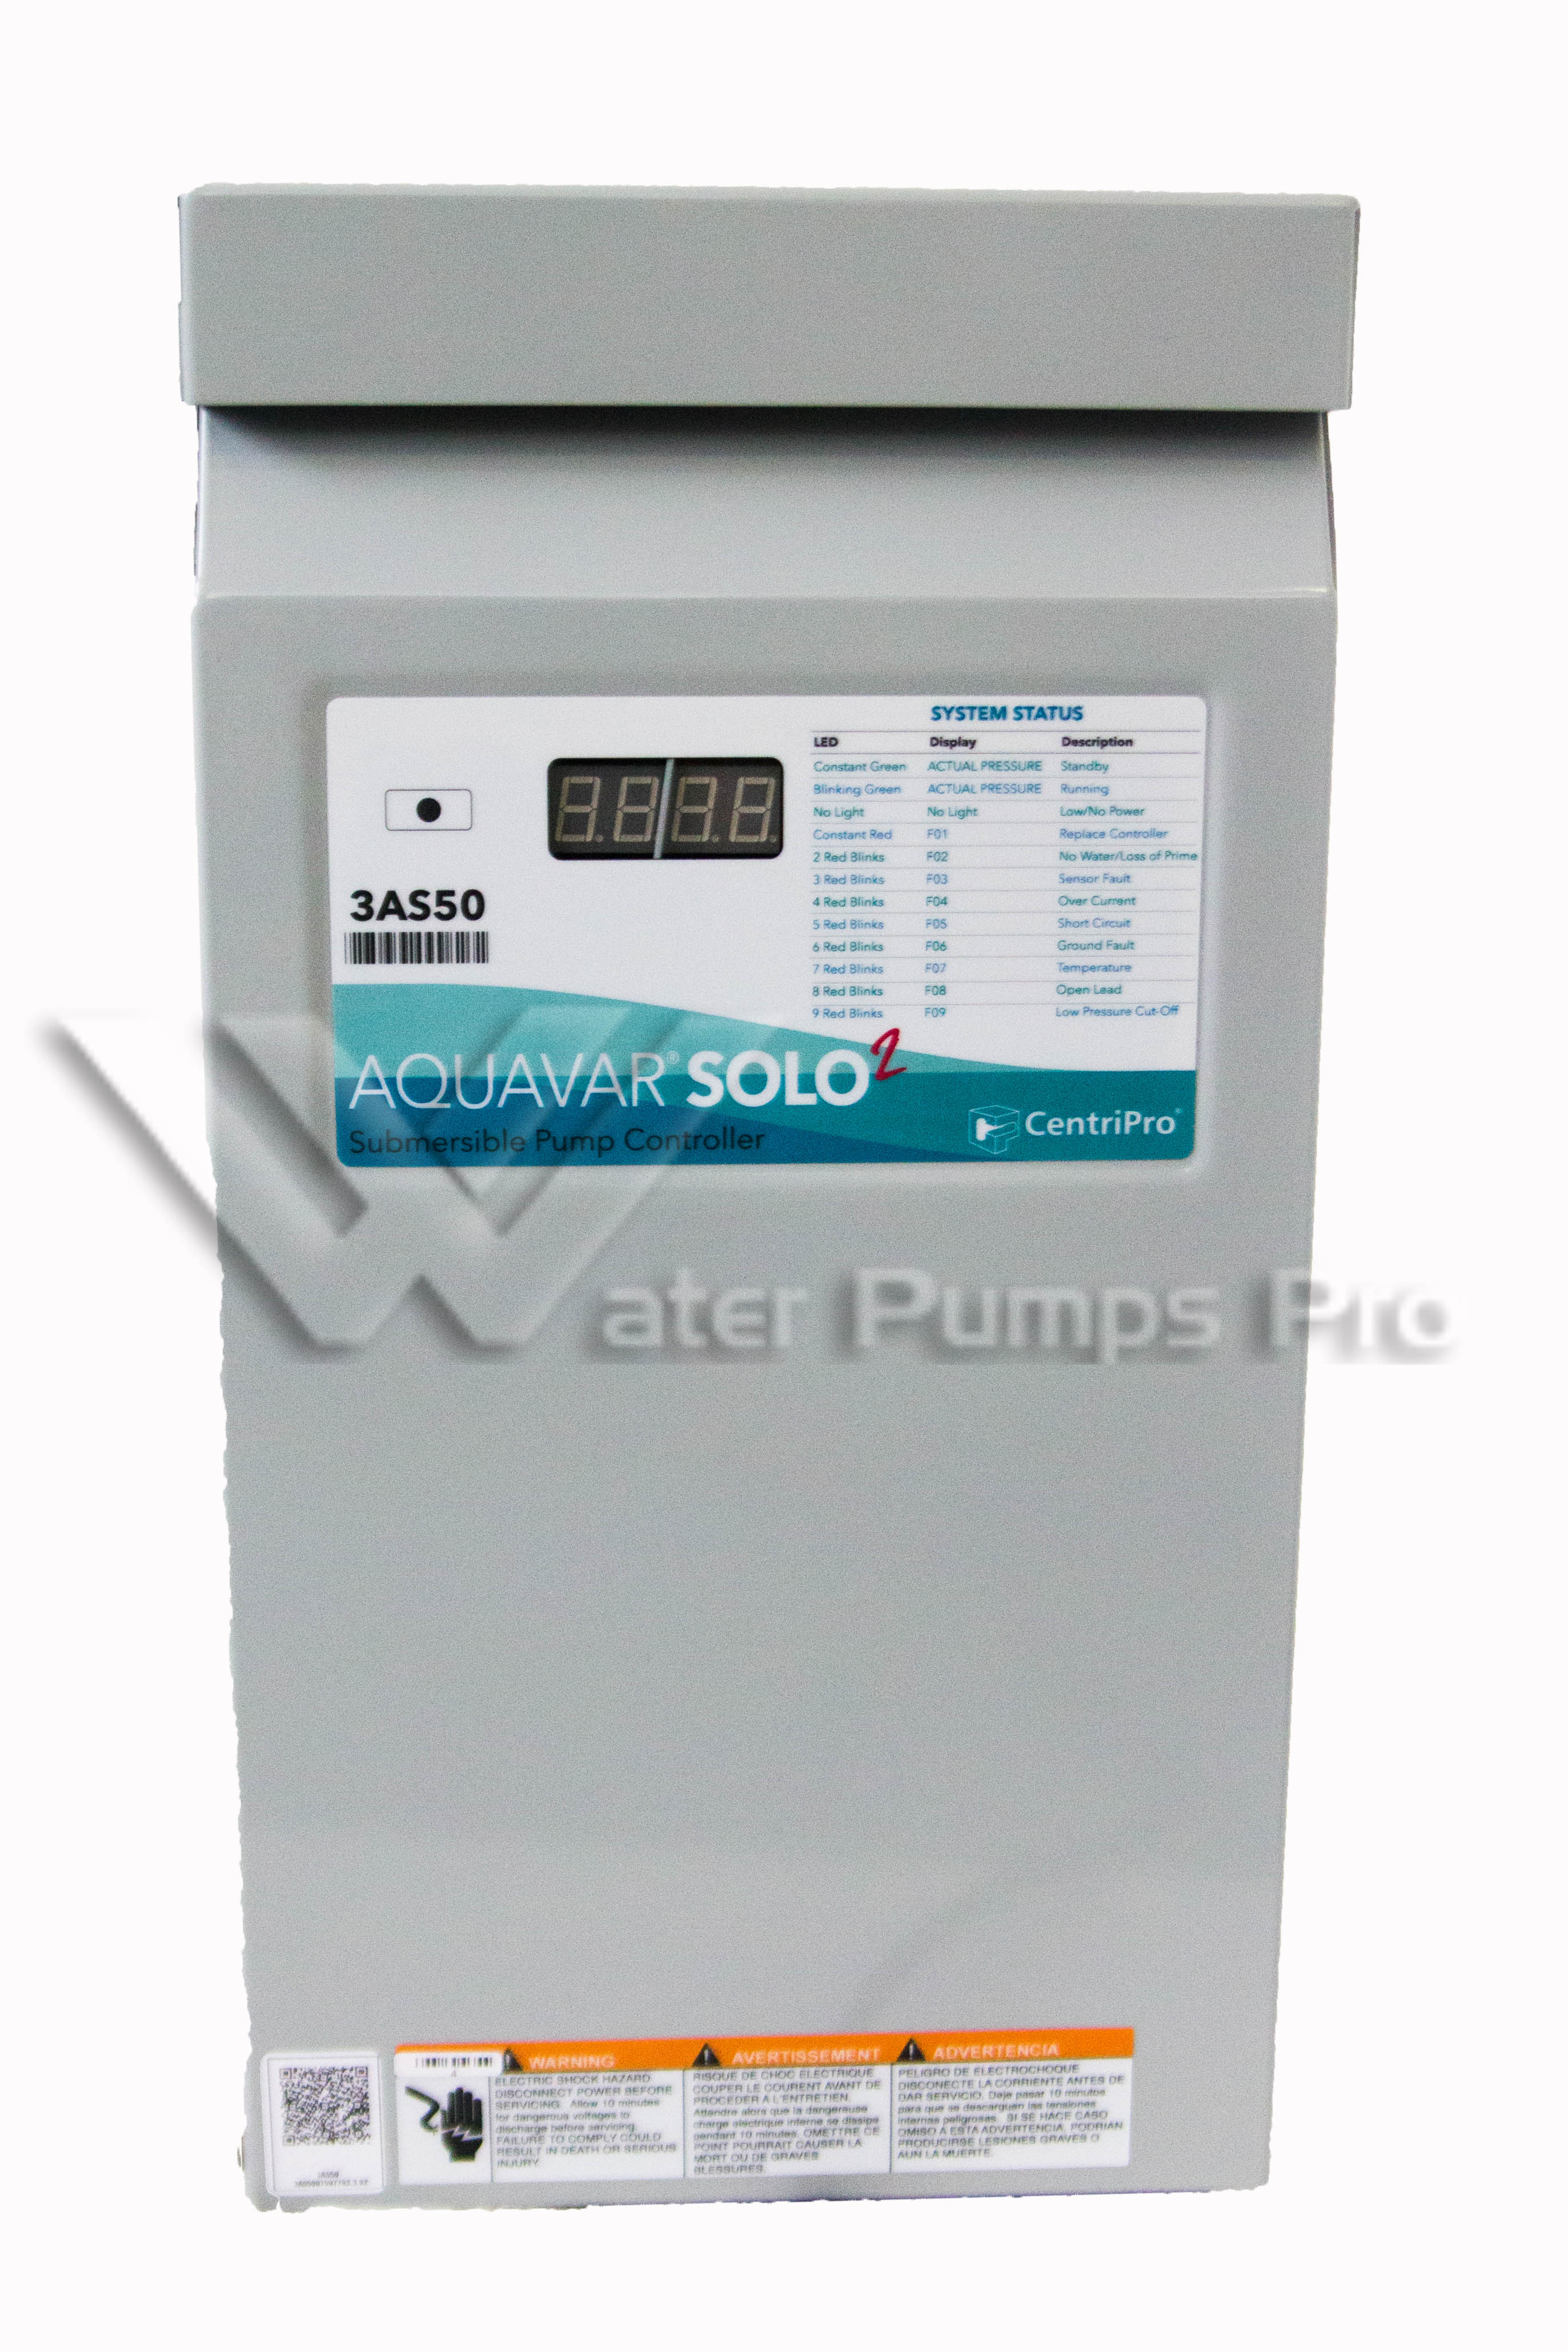 Goulds 3AS50 Replaces BF50 Aquavar SOLO Sub Pump Controller 5HP